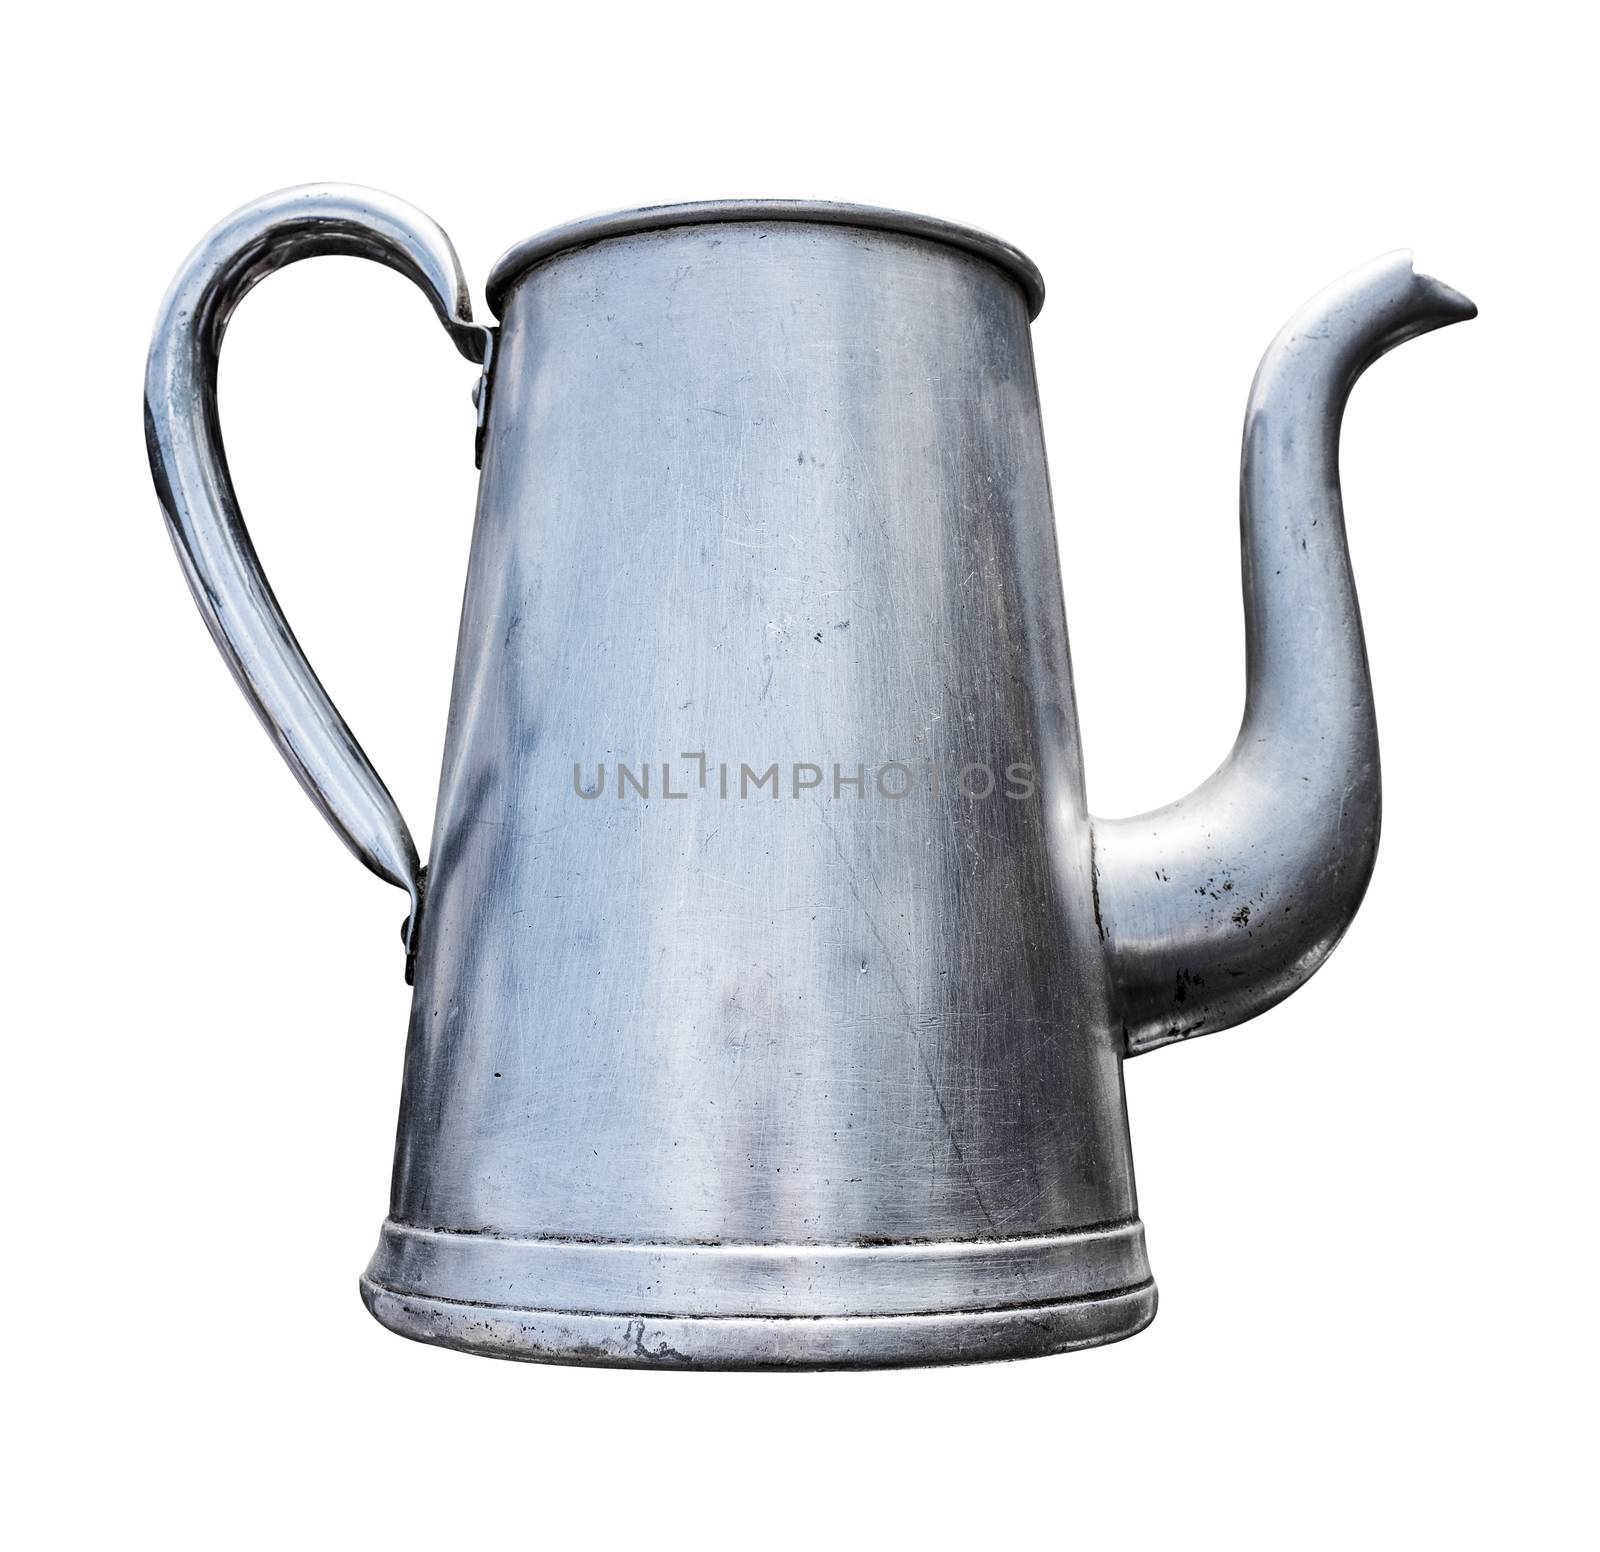 Antique Slim Metal Teapot With Handle And Spout Isolated On A White Background